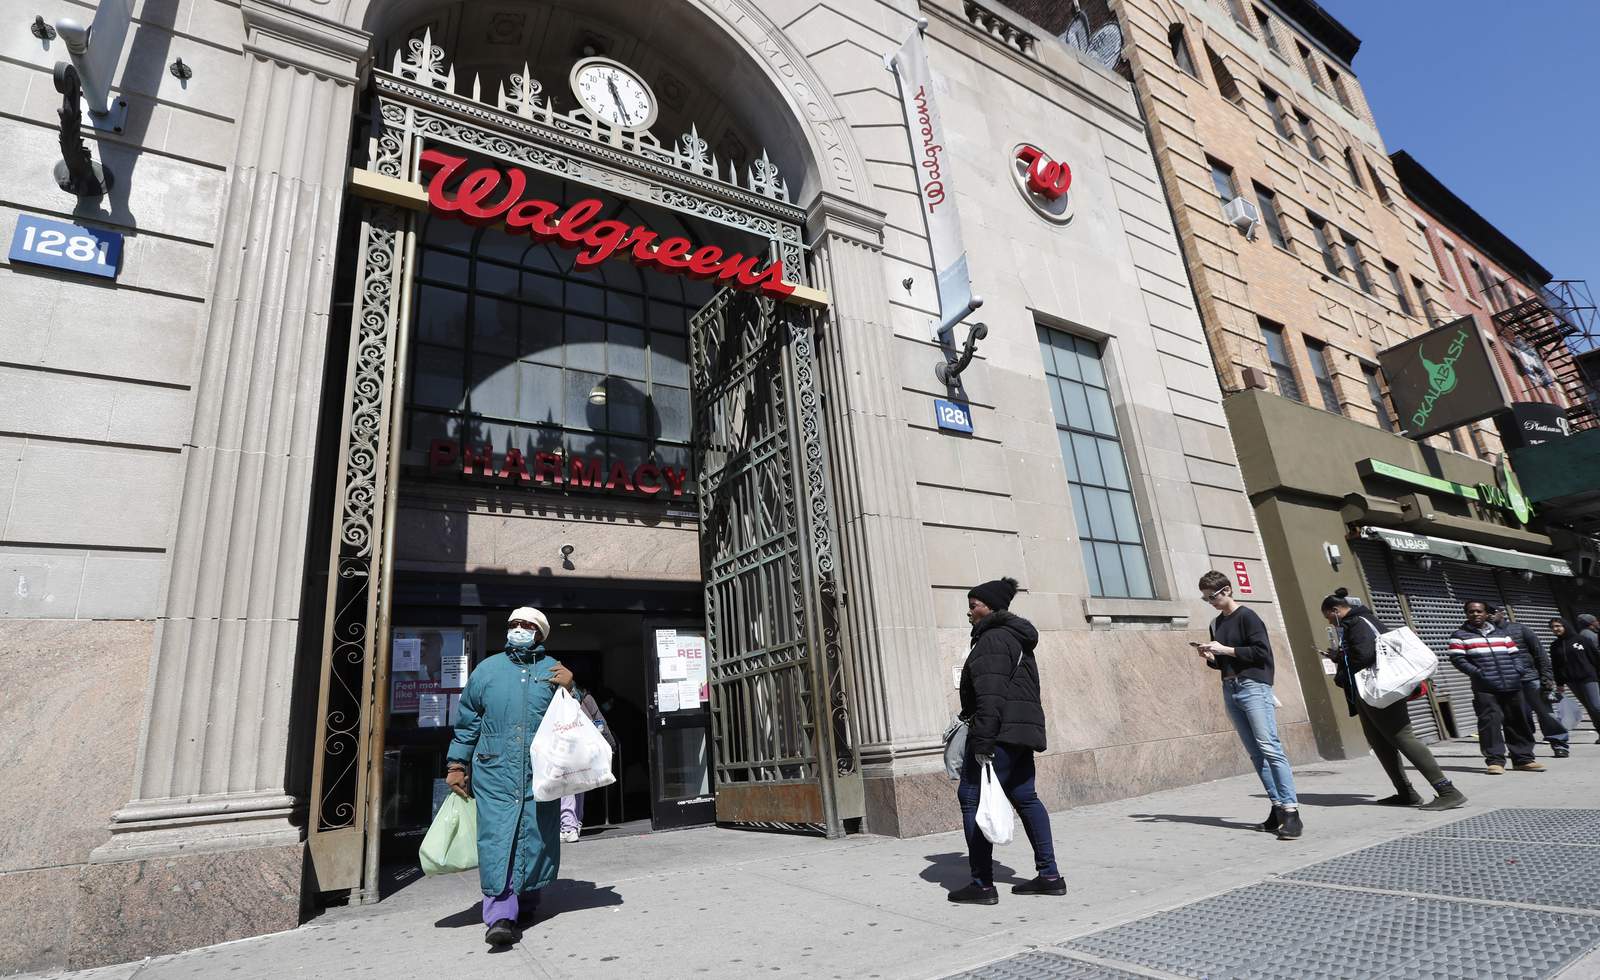 Walgreens lost $1.7B in 3Q as global pandemic tightened grip